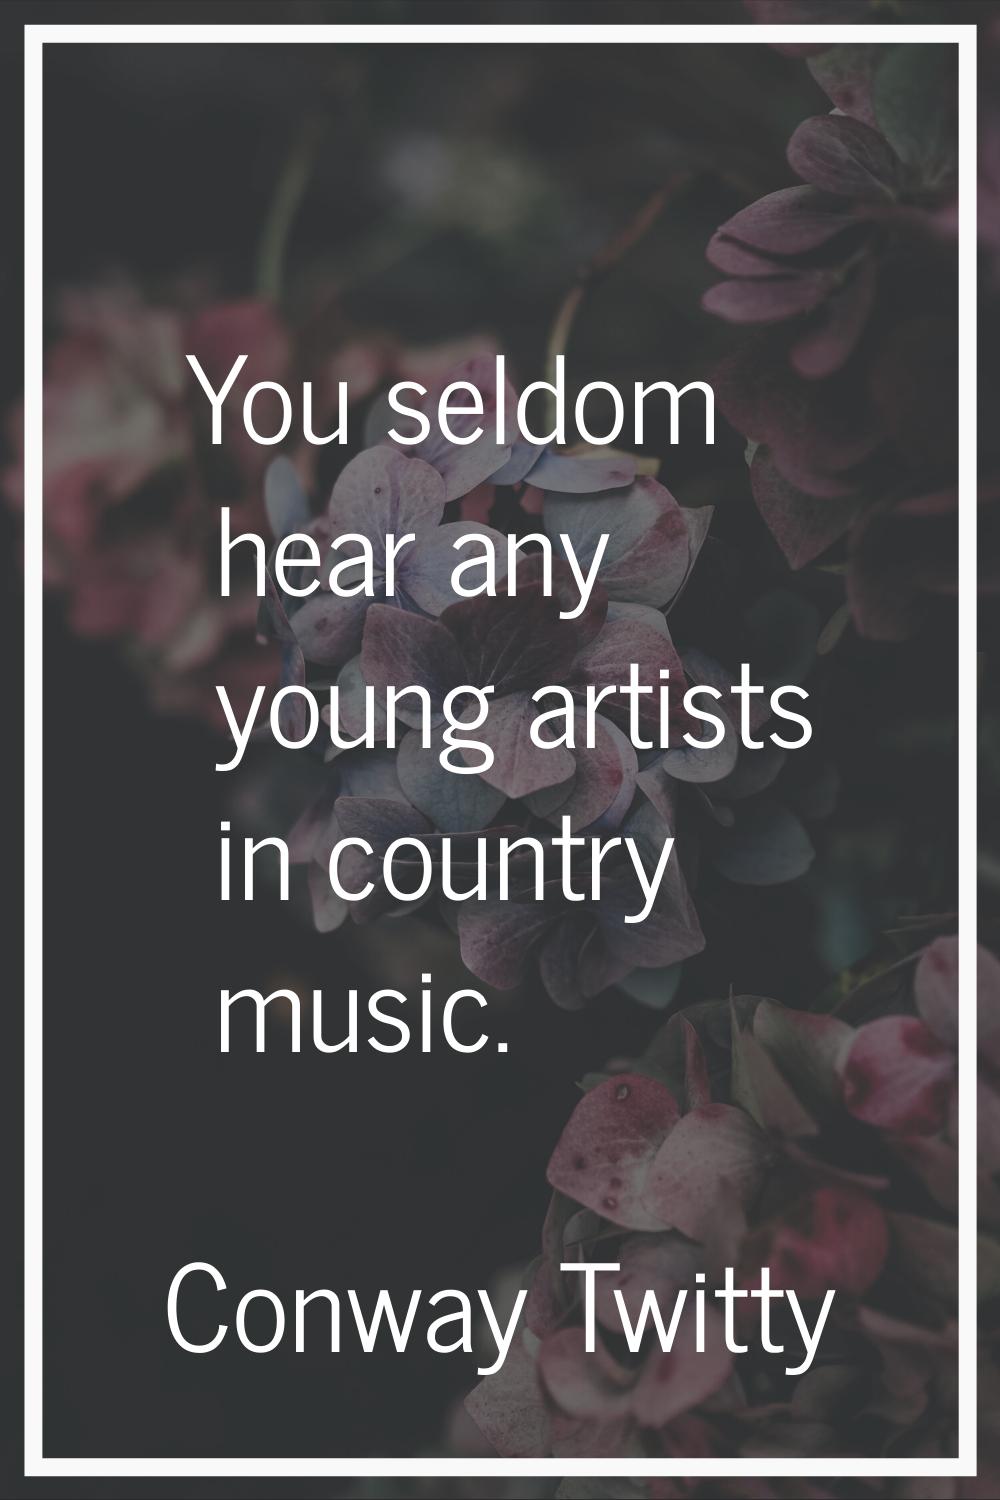 You seldom hear any young artists in country music.